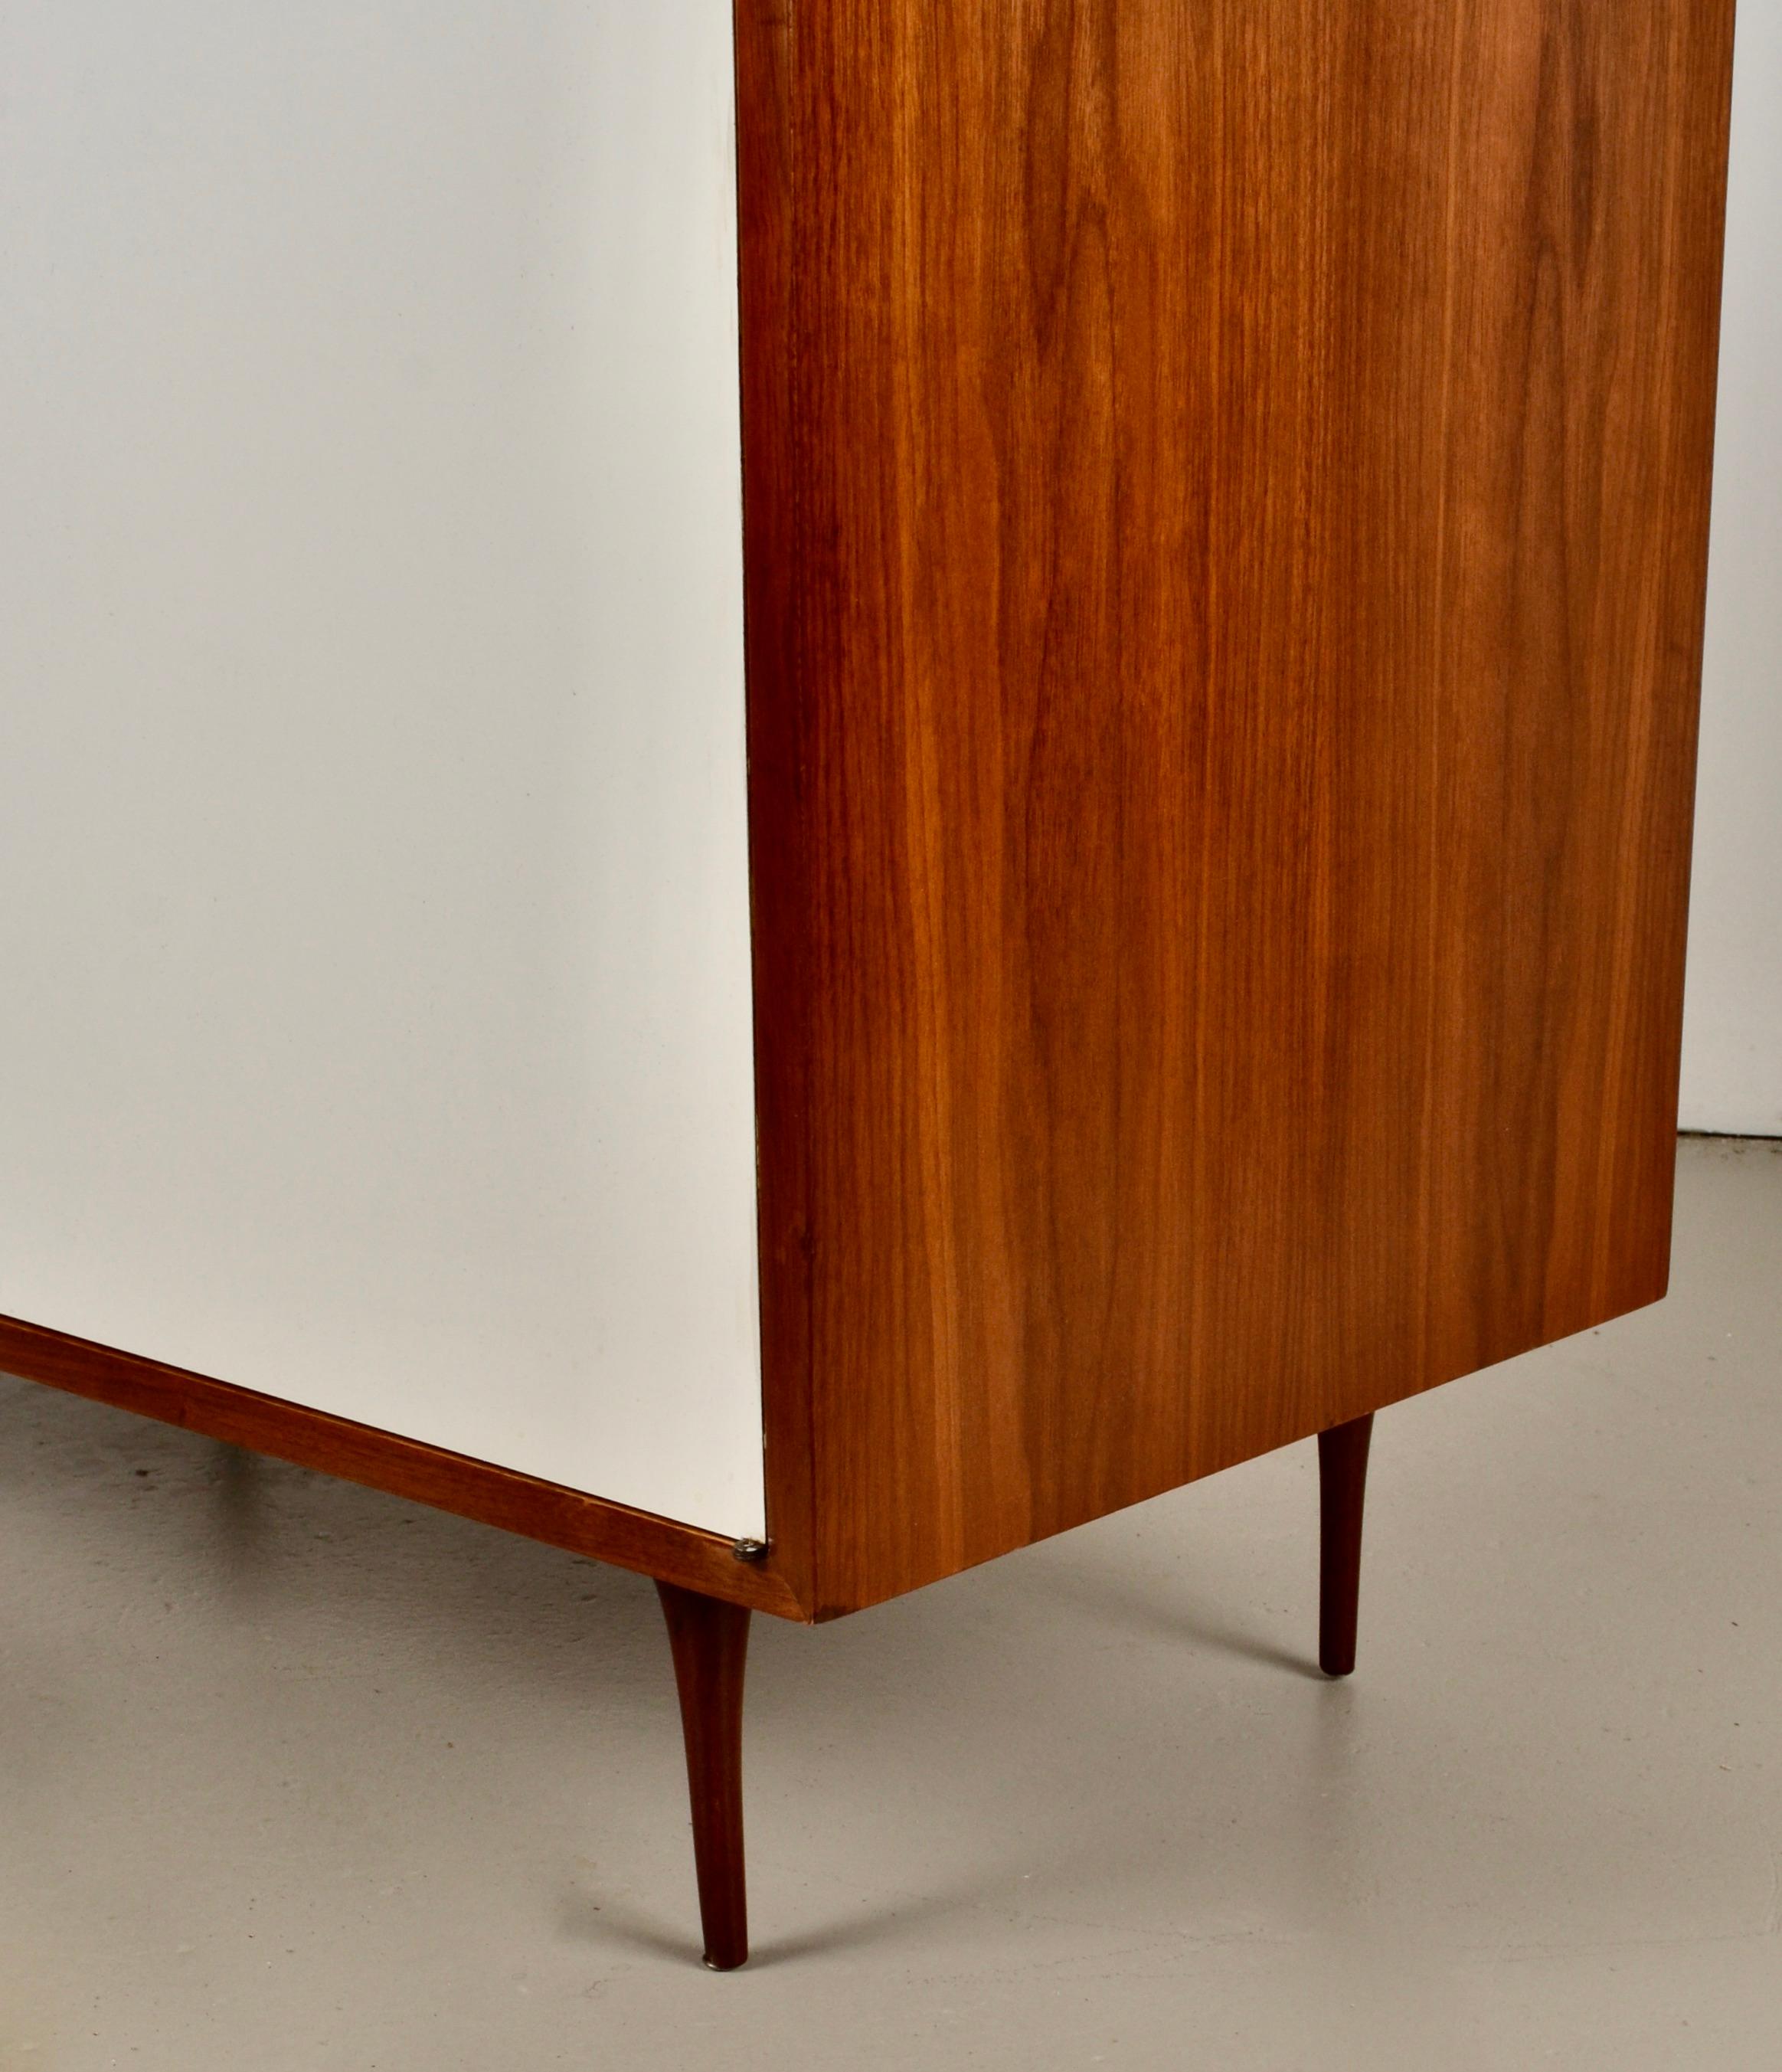 Modern Walnut Credenza with Laminate Doors, USA, 1960s For Sale 2